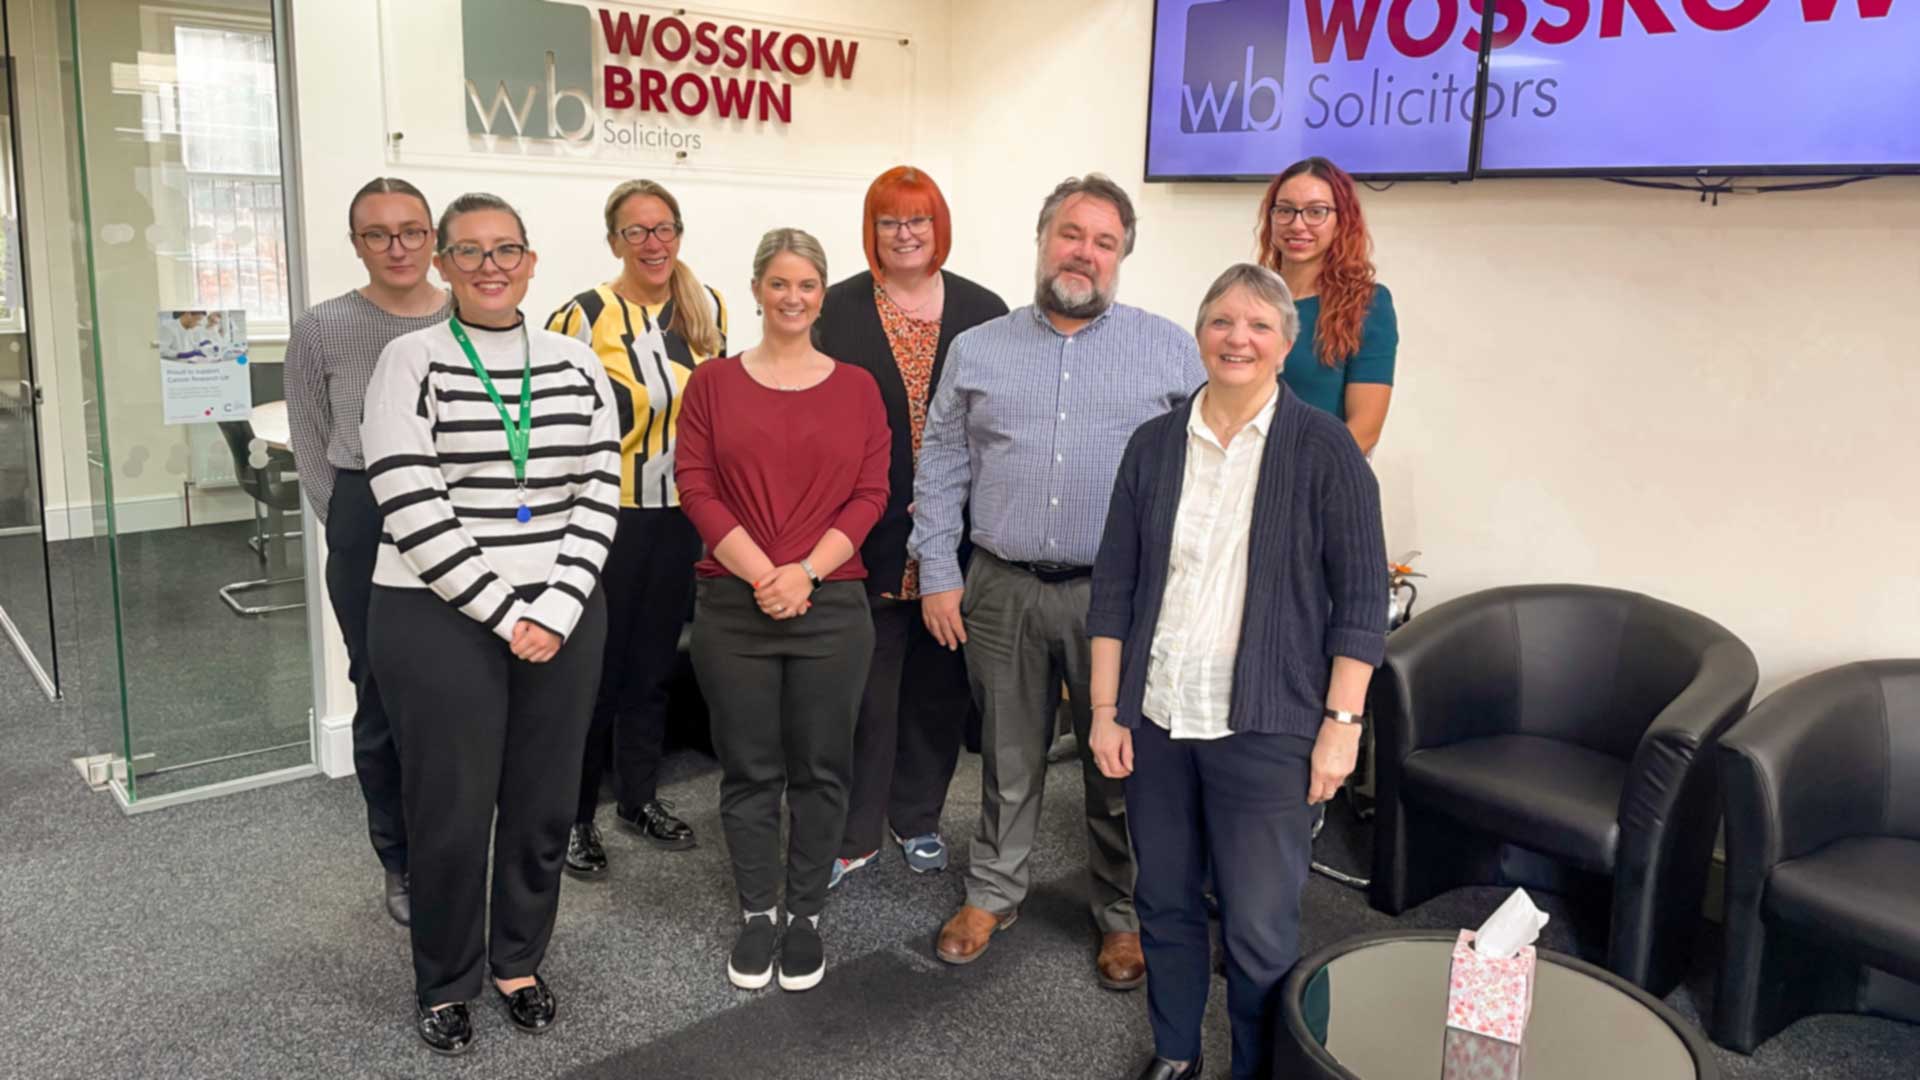 Barnsley Solicitors, Wosskow Brown